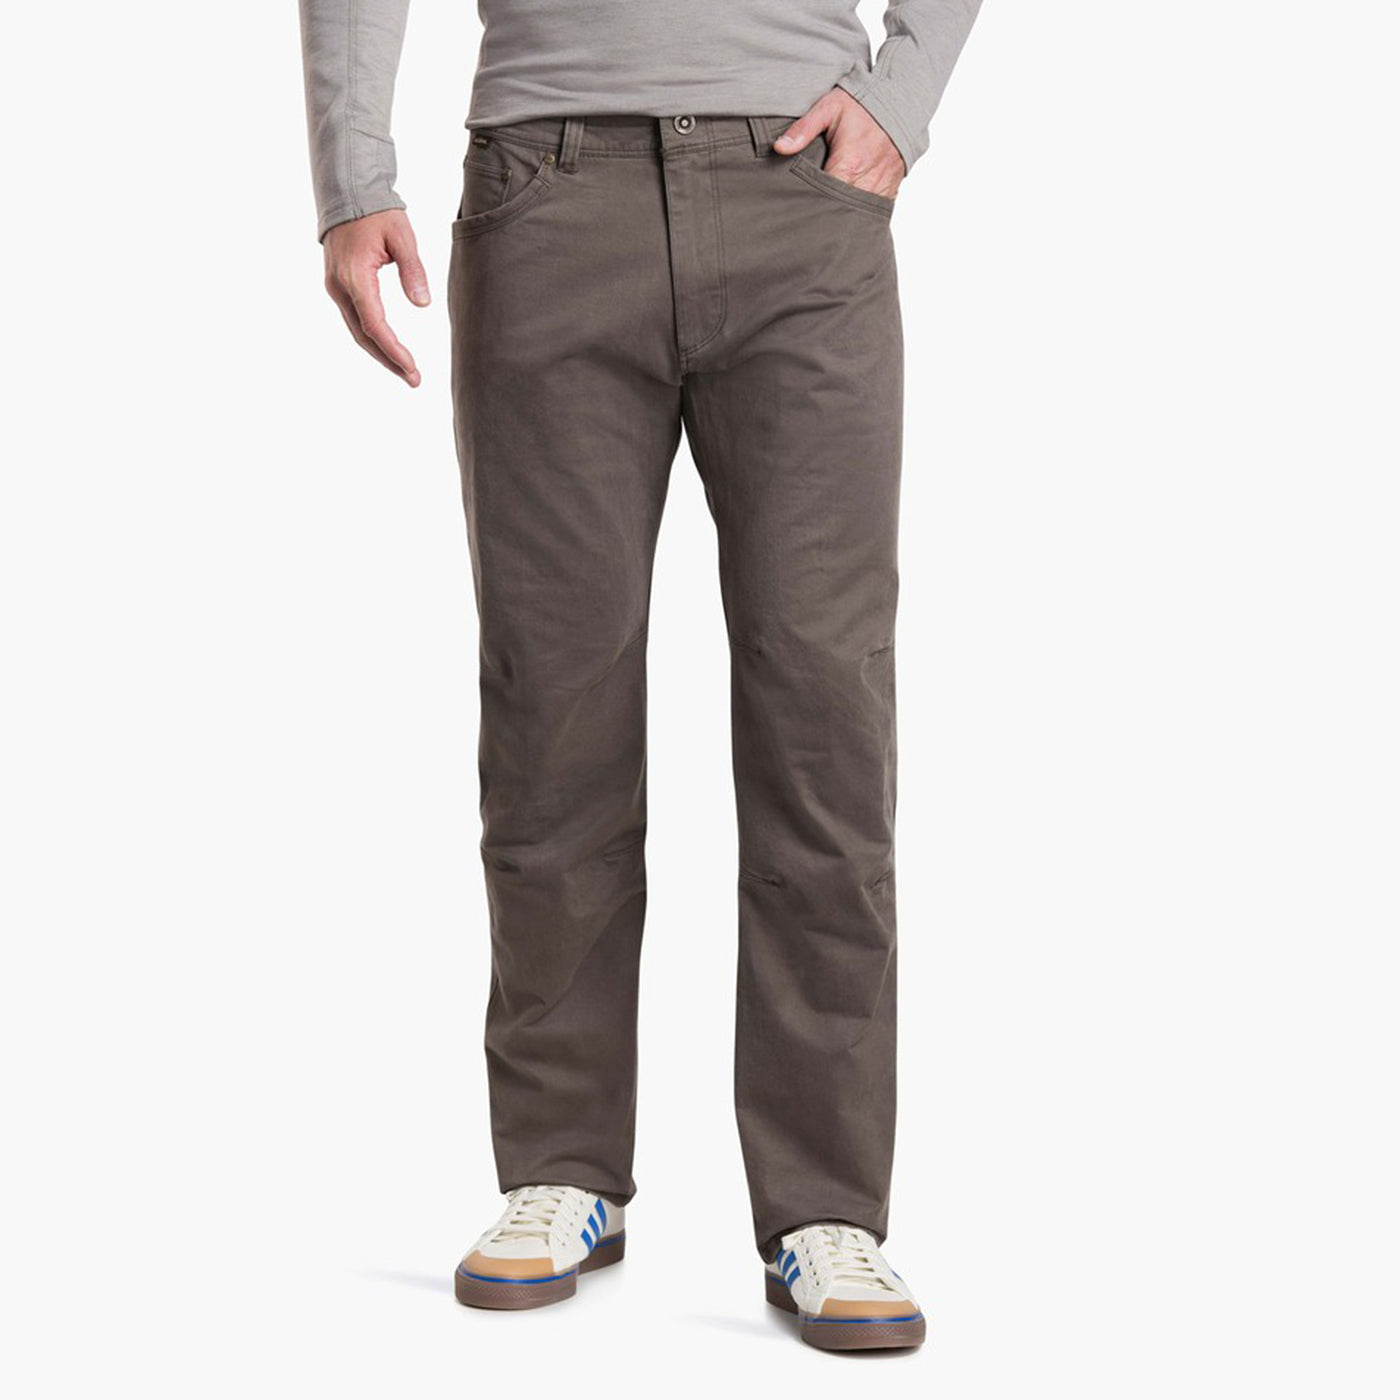 kuhl rydr pant mens on model front view in color grey